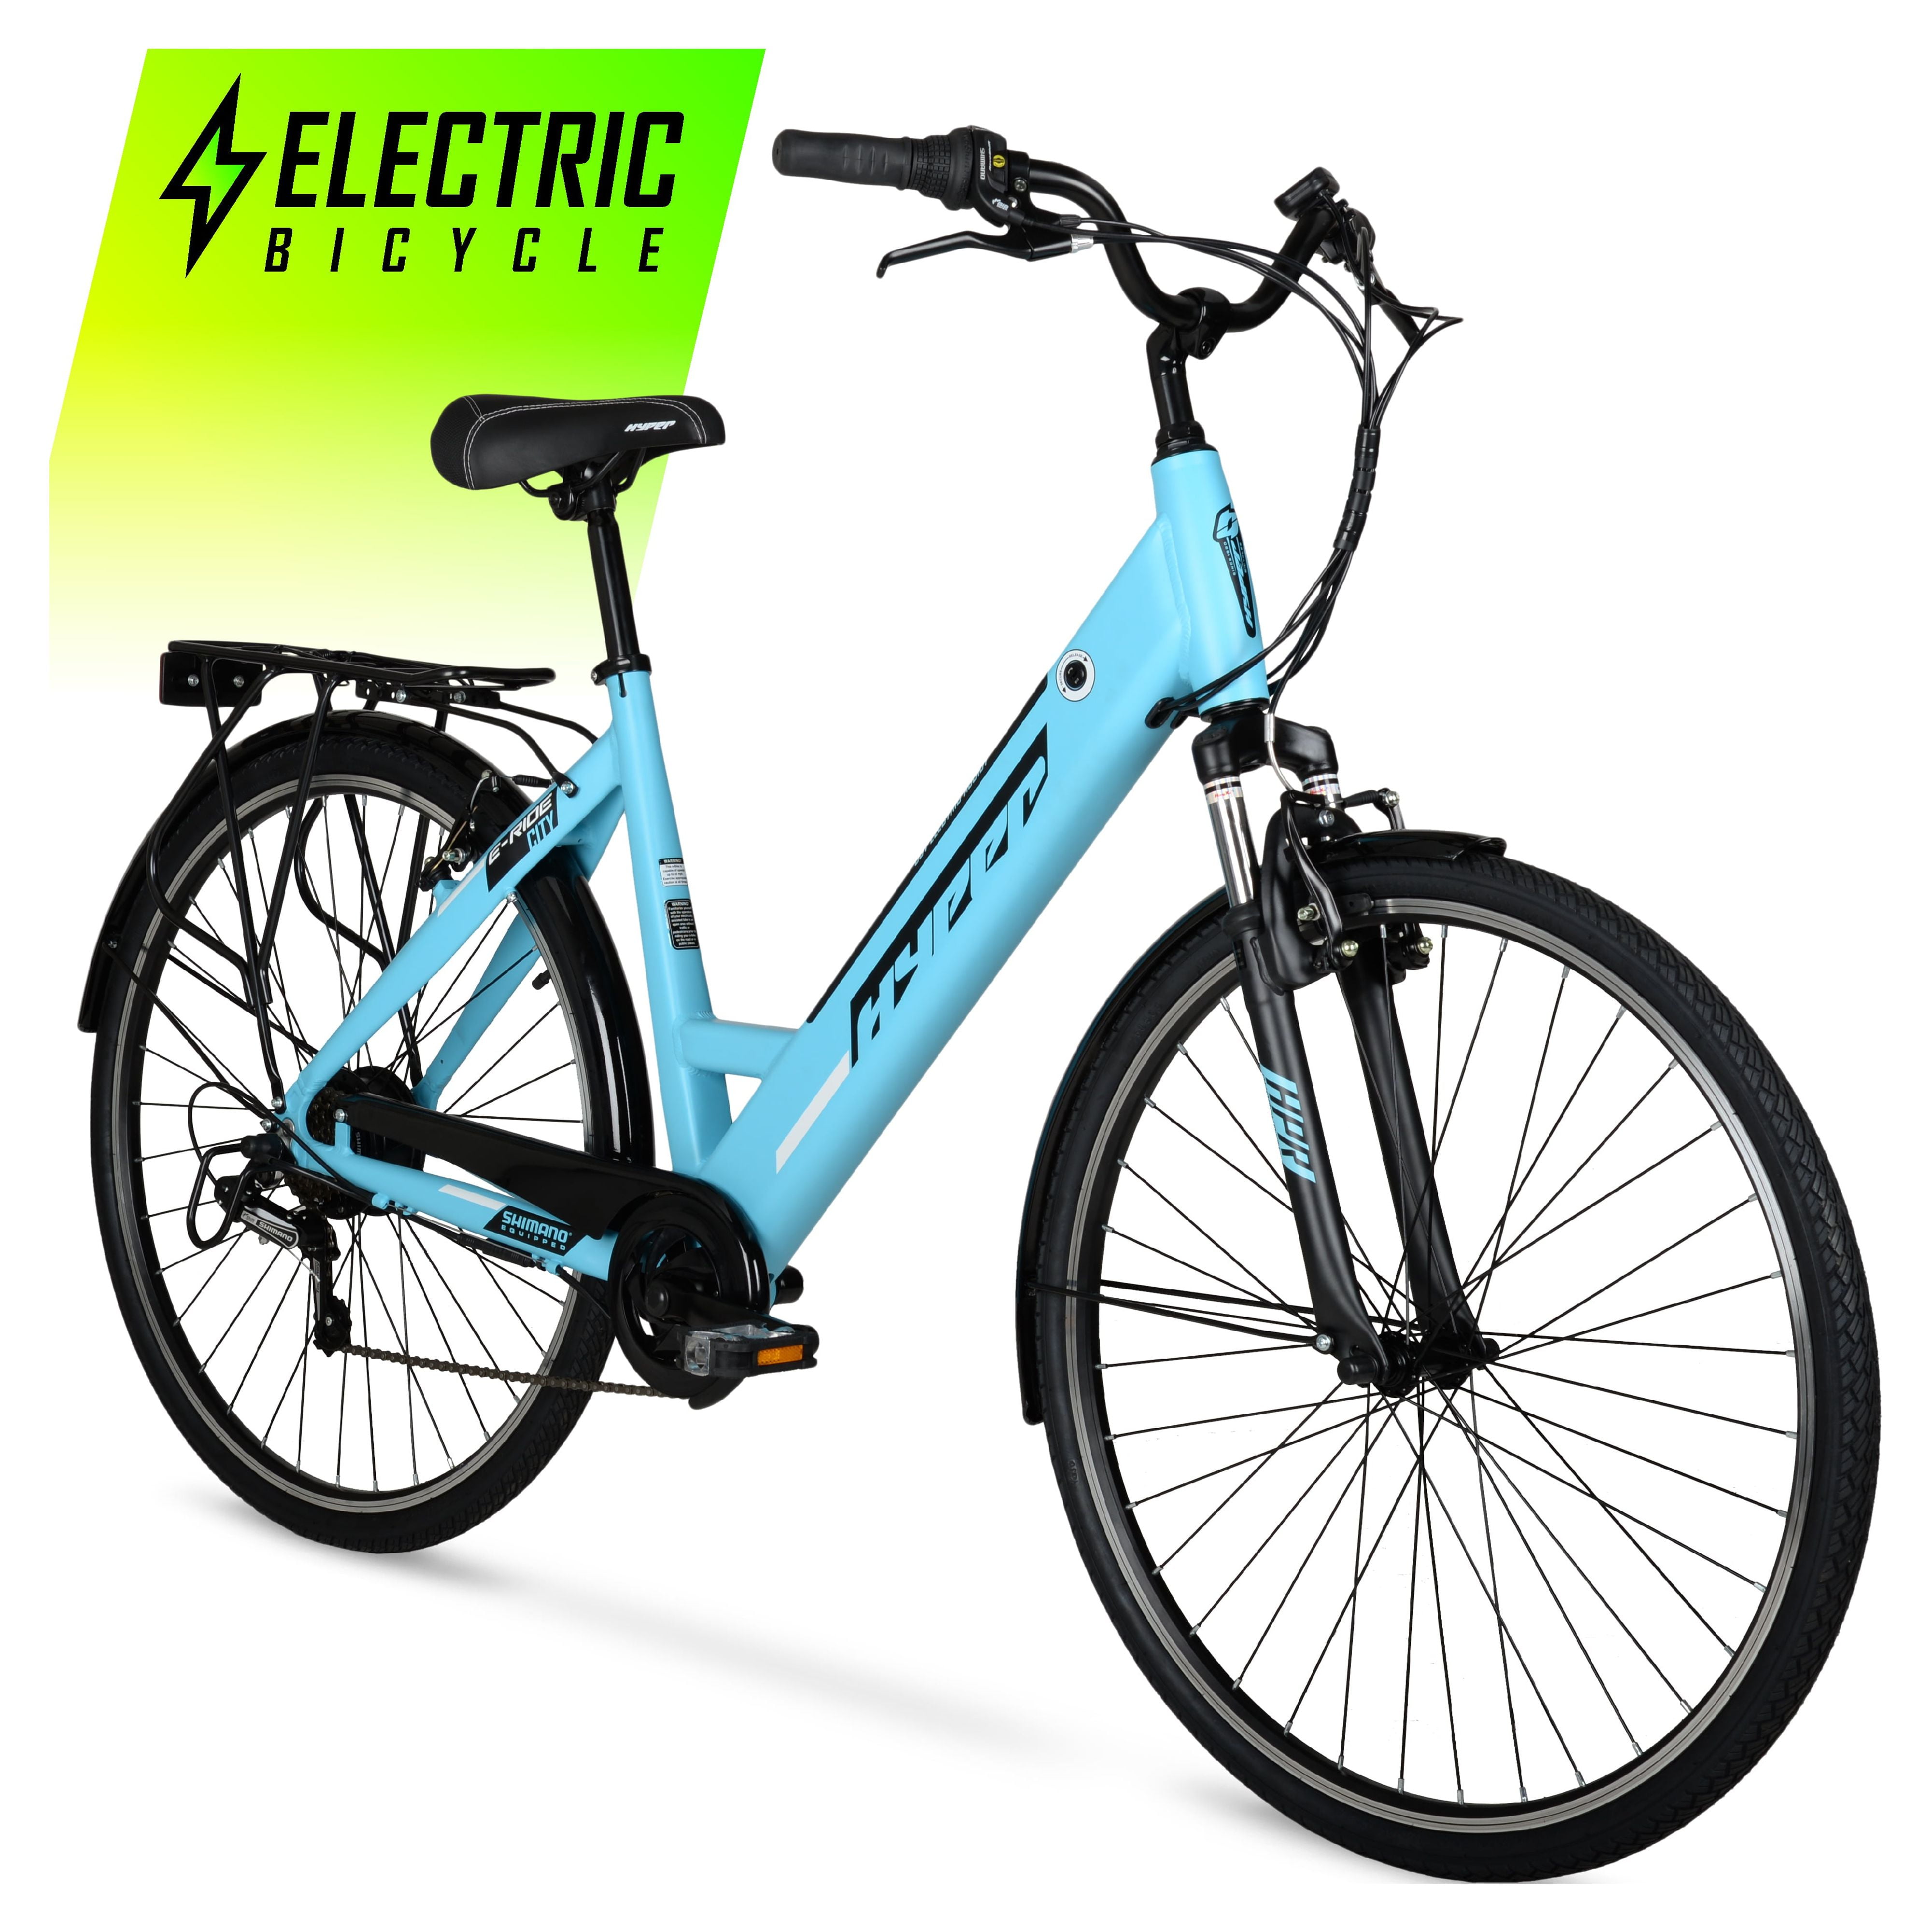 Hyper Bicycles E-Ride 700C 36V Electric Commuter E-Bike for Adults, Pedal-Assist, 250W Motor, Black